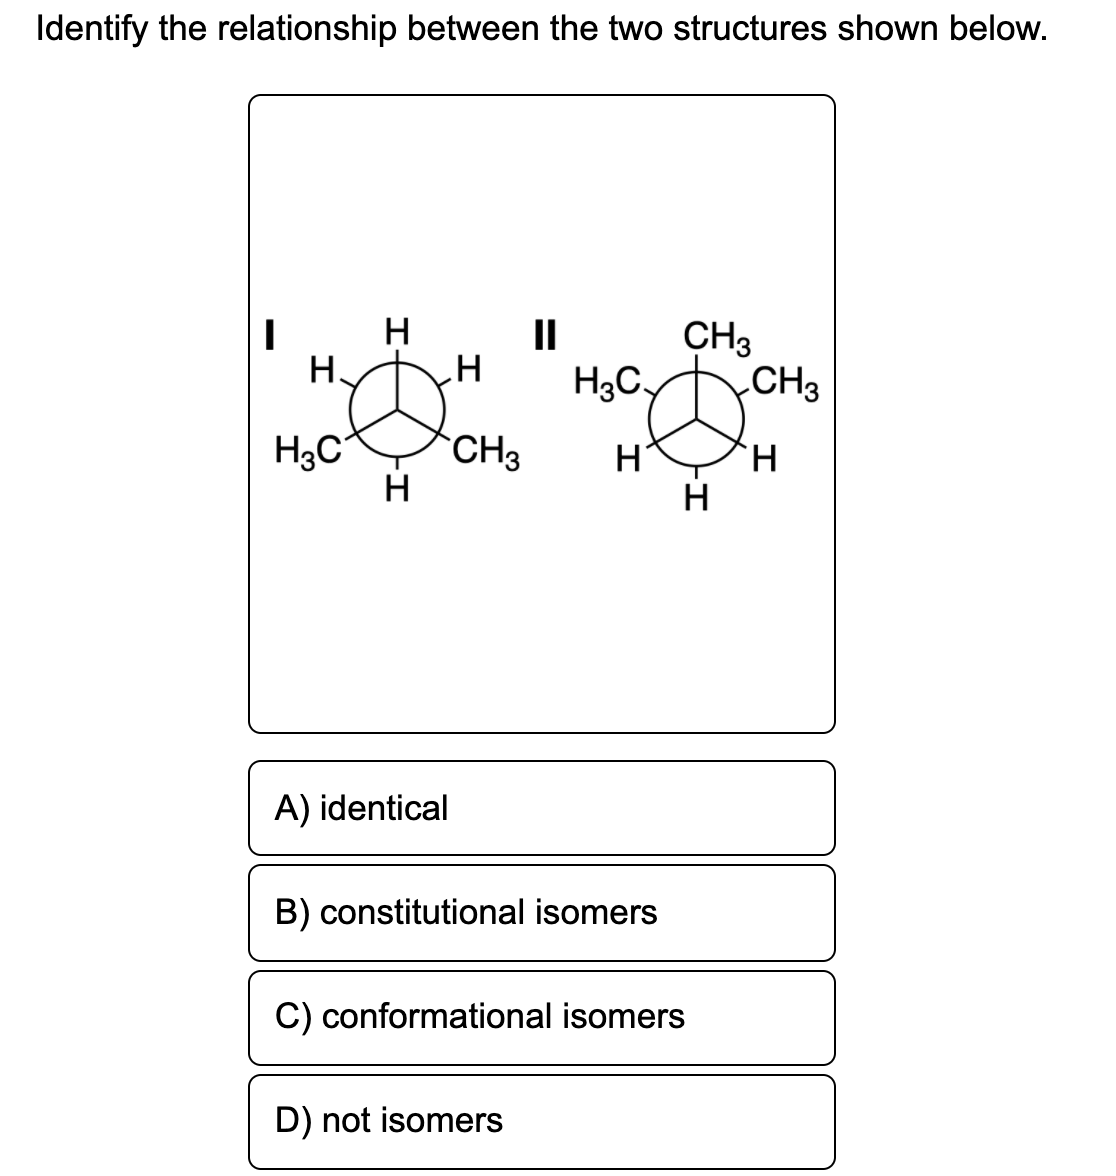 Identify the relationship between the two structures shown below.
II
CH3
Н.
H3C.
CH3
H3C°
CH3
H.
H
A) identical
B) constitutional isomers
C) conformational isomers
D) not isomers
